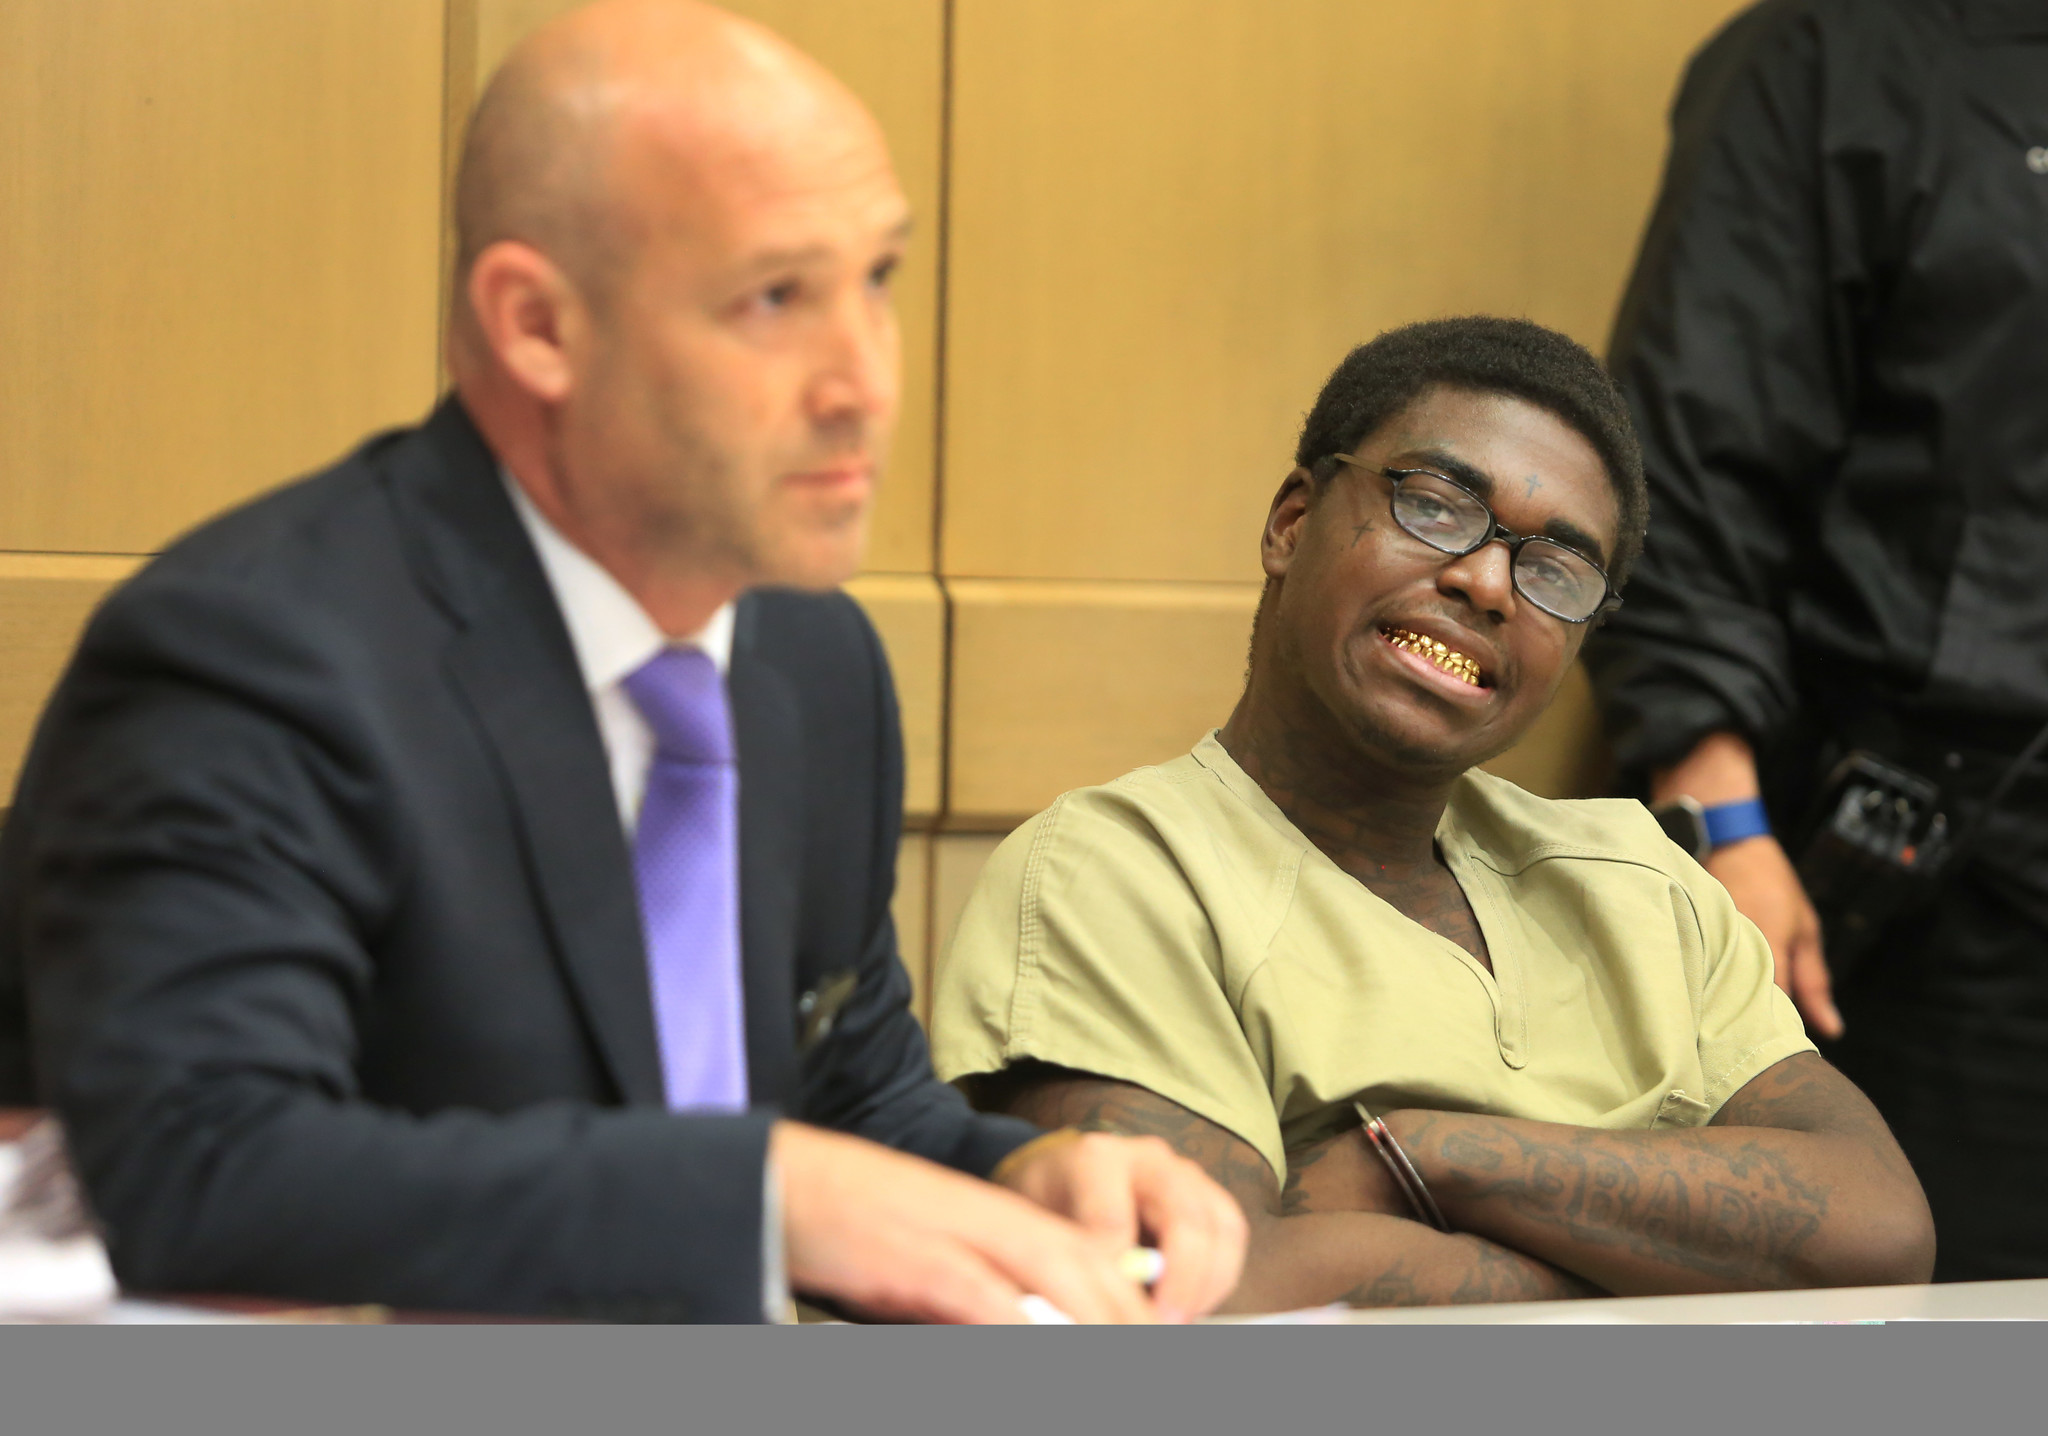 Kodak Black sentenced to 364 days in jail, but could be released in a month - Orlando ...